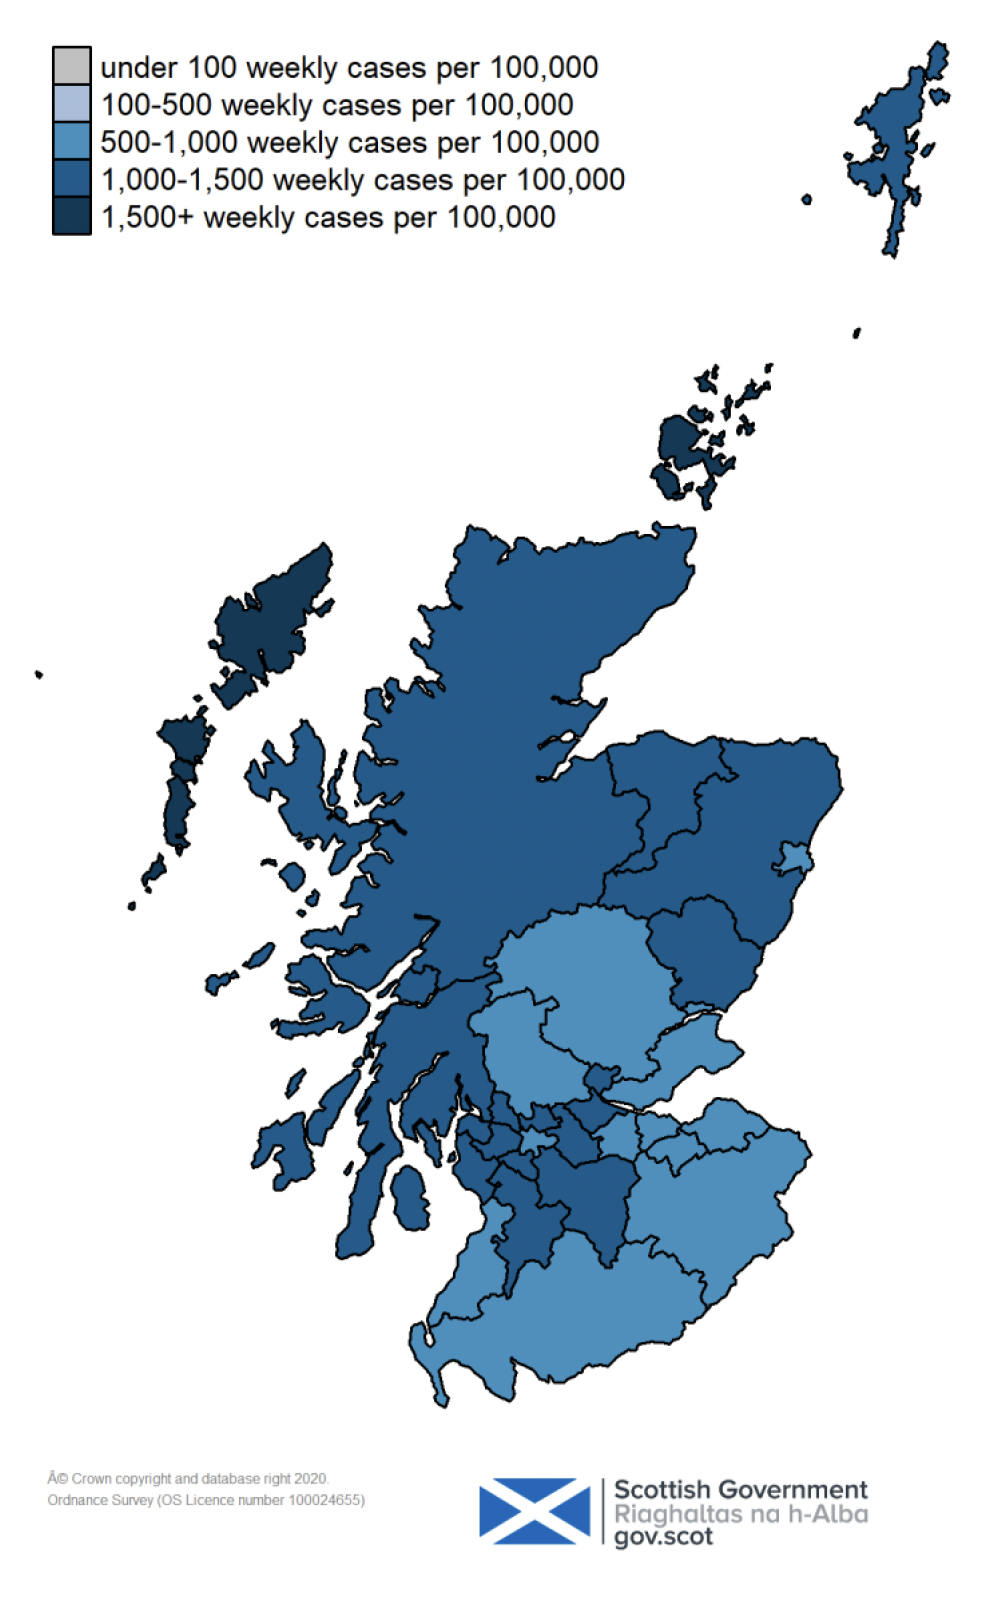 one colour coded map showing positive LFD and PCR weekly cases per 100,000 people by specimen date in each local authority in Scotland on 5 March 2022. The map ranges from grey for under 100 weekly cases per 100,000, through very light blue for 100-500, blue for 500-1,000, darker blue for 1,000-1,500, and very dark blue for over 1,500 weekly cases per 100,000 people.